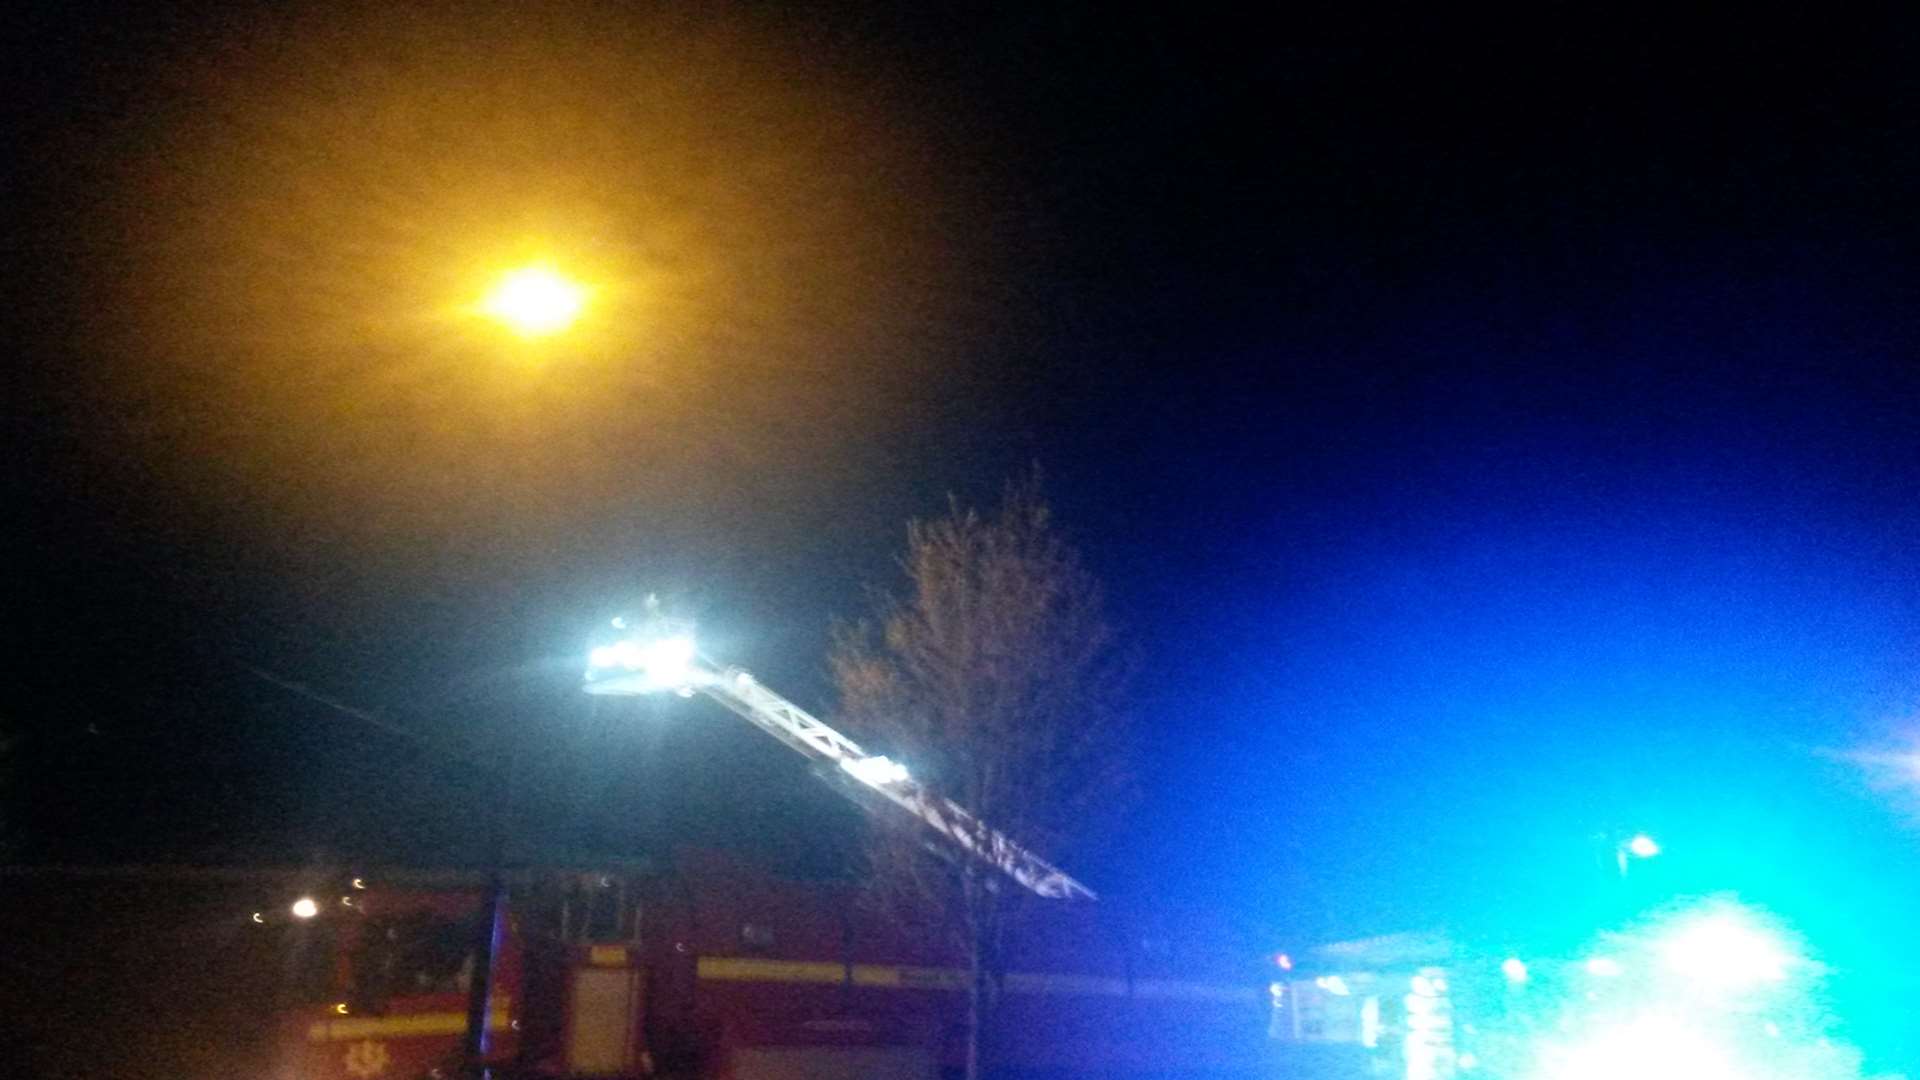 Firefighters used a height ladder to tackle the fire at the Tesco Express in Mace Lane, Ashford